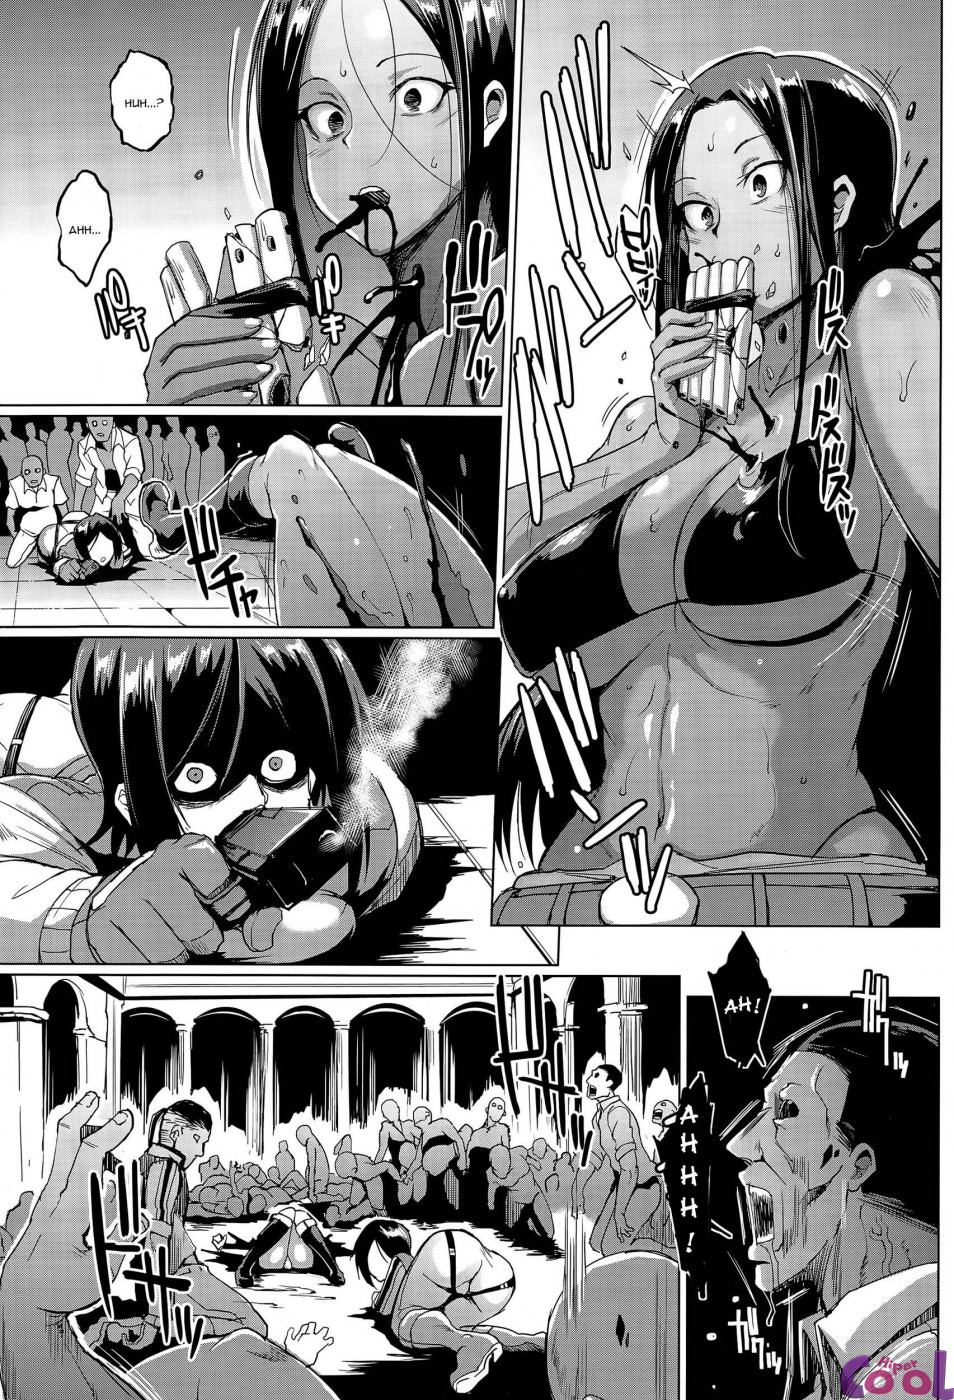 voodoo-squad-chuuhen-chapter-01-page-11.jpg